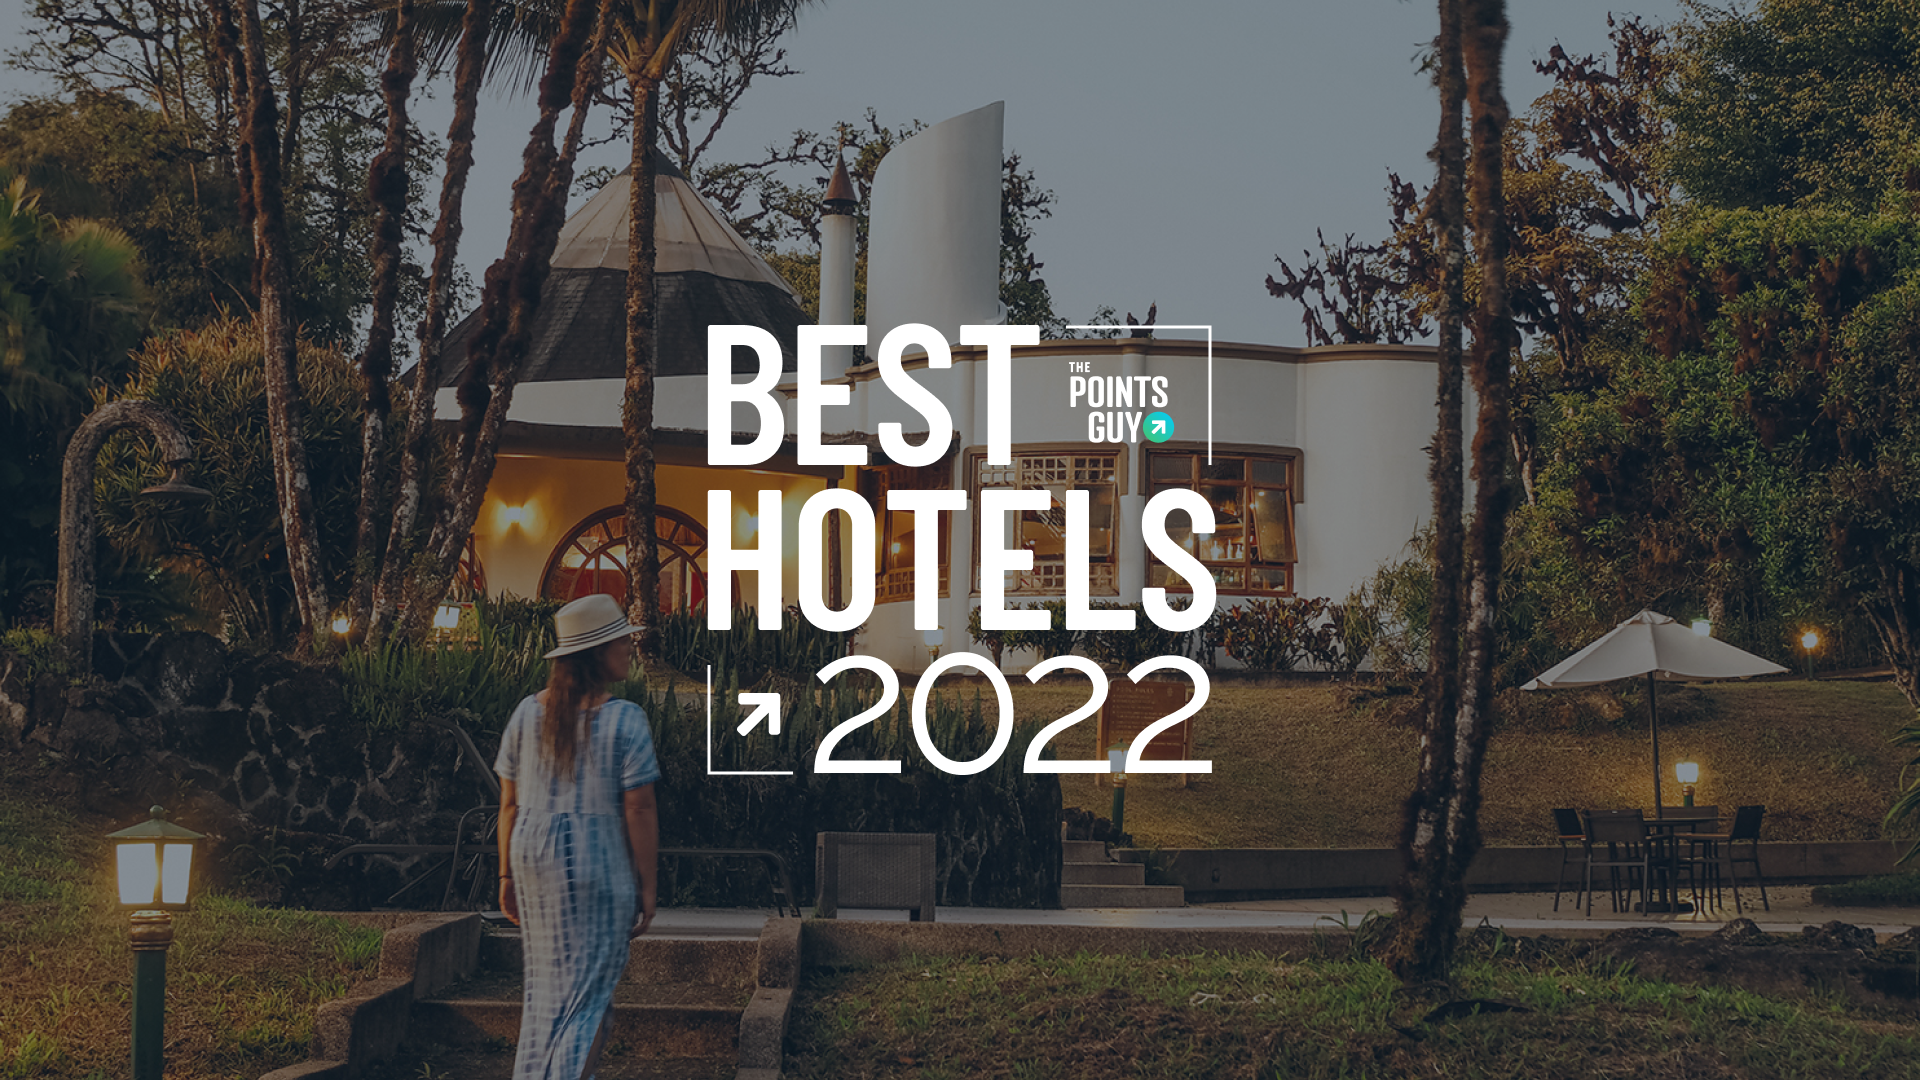 These are the best new hotels that opened in 2022